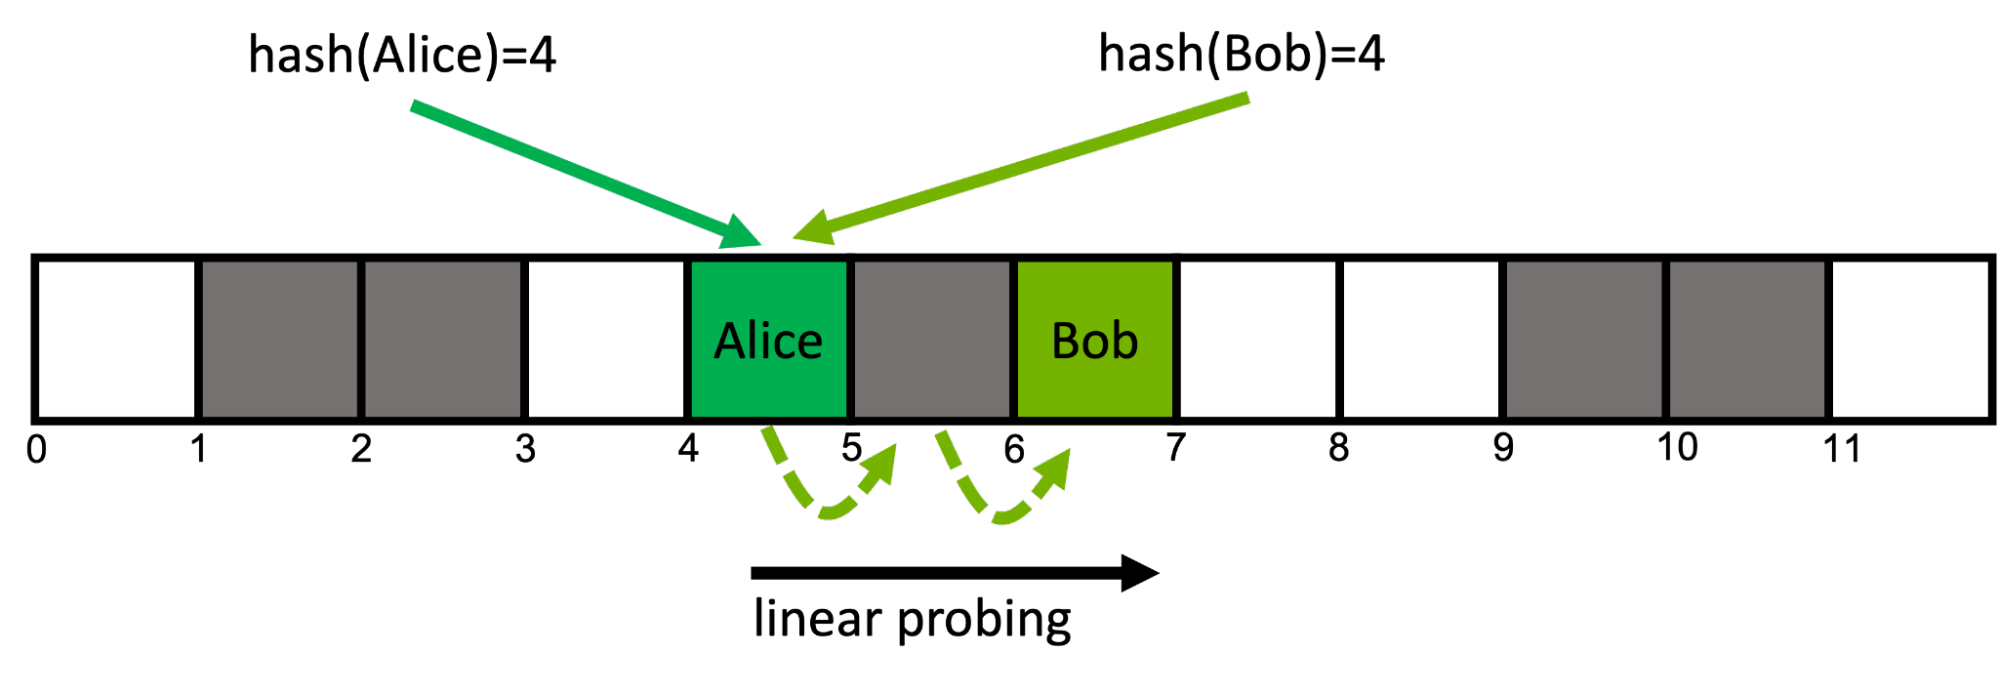 Diagram showing a linear probing strategy for when two hash values are the same for two distinct keys